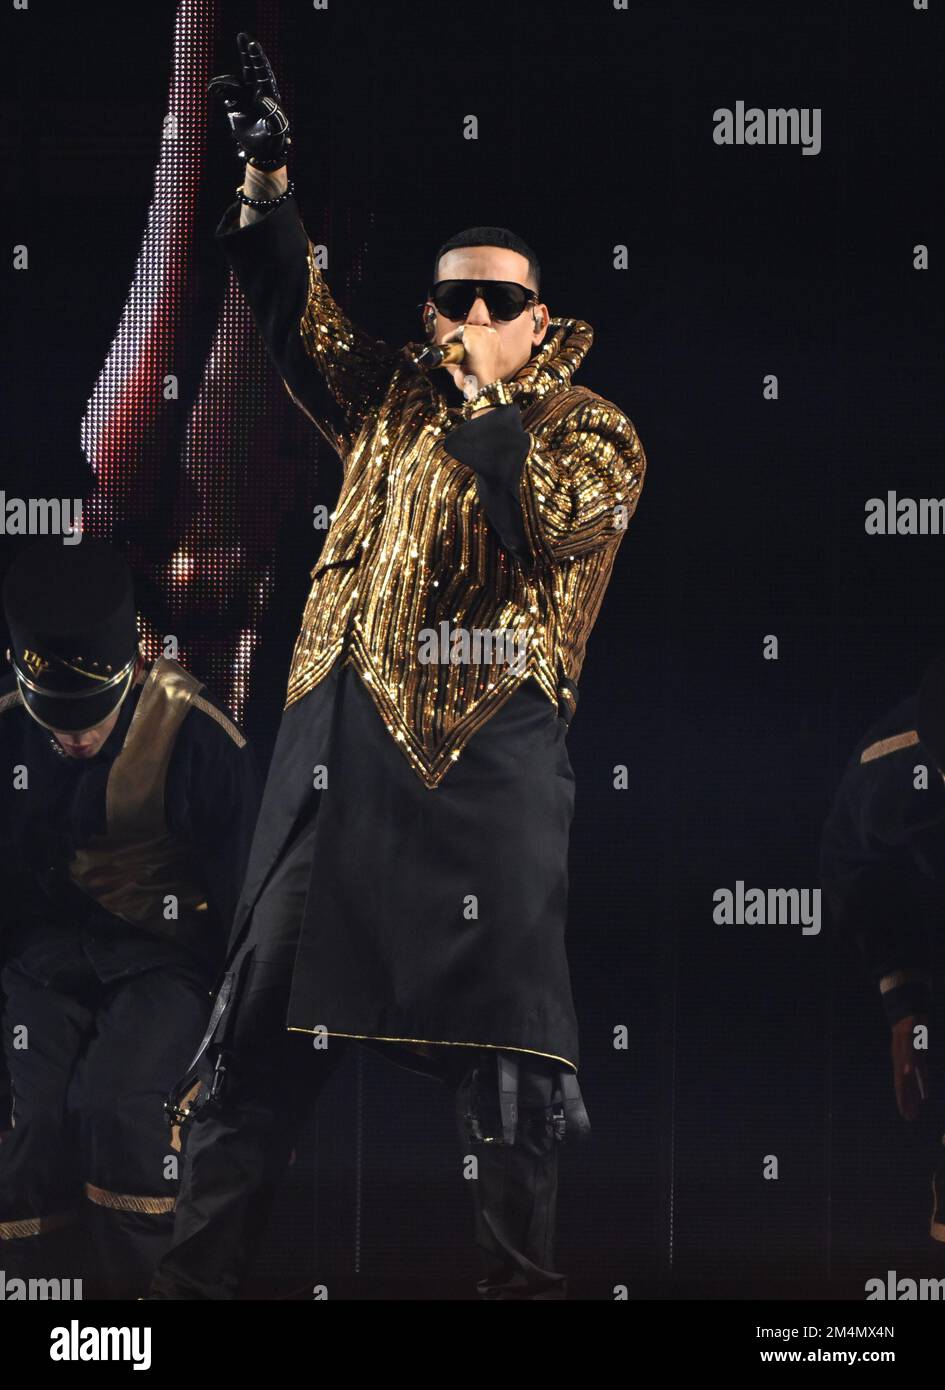 Daddy Yankee: latest news and pictures - HOLA! USA